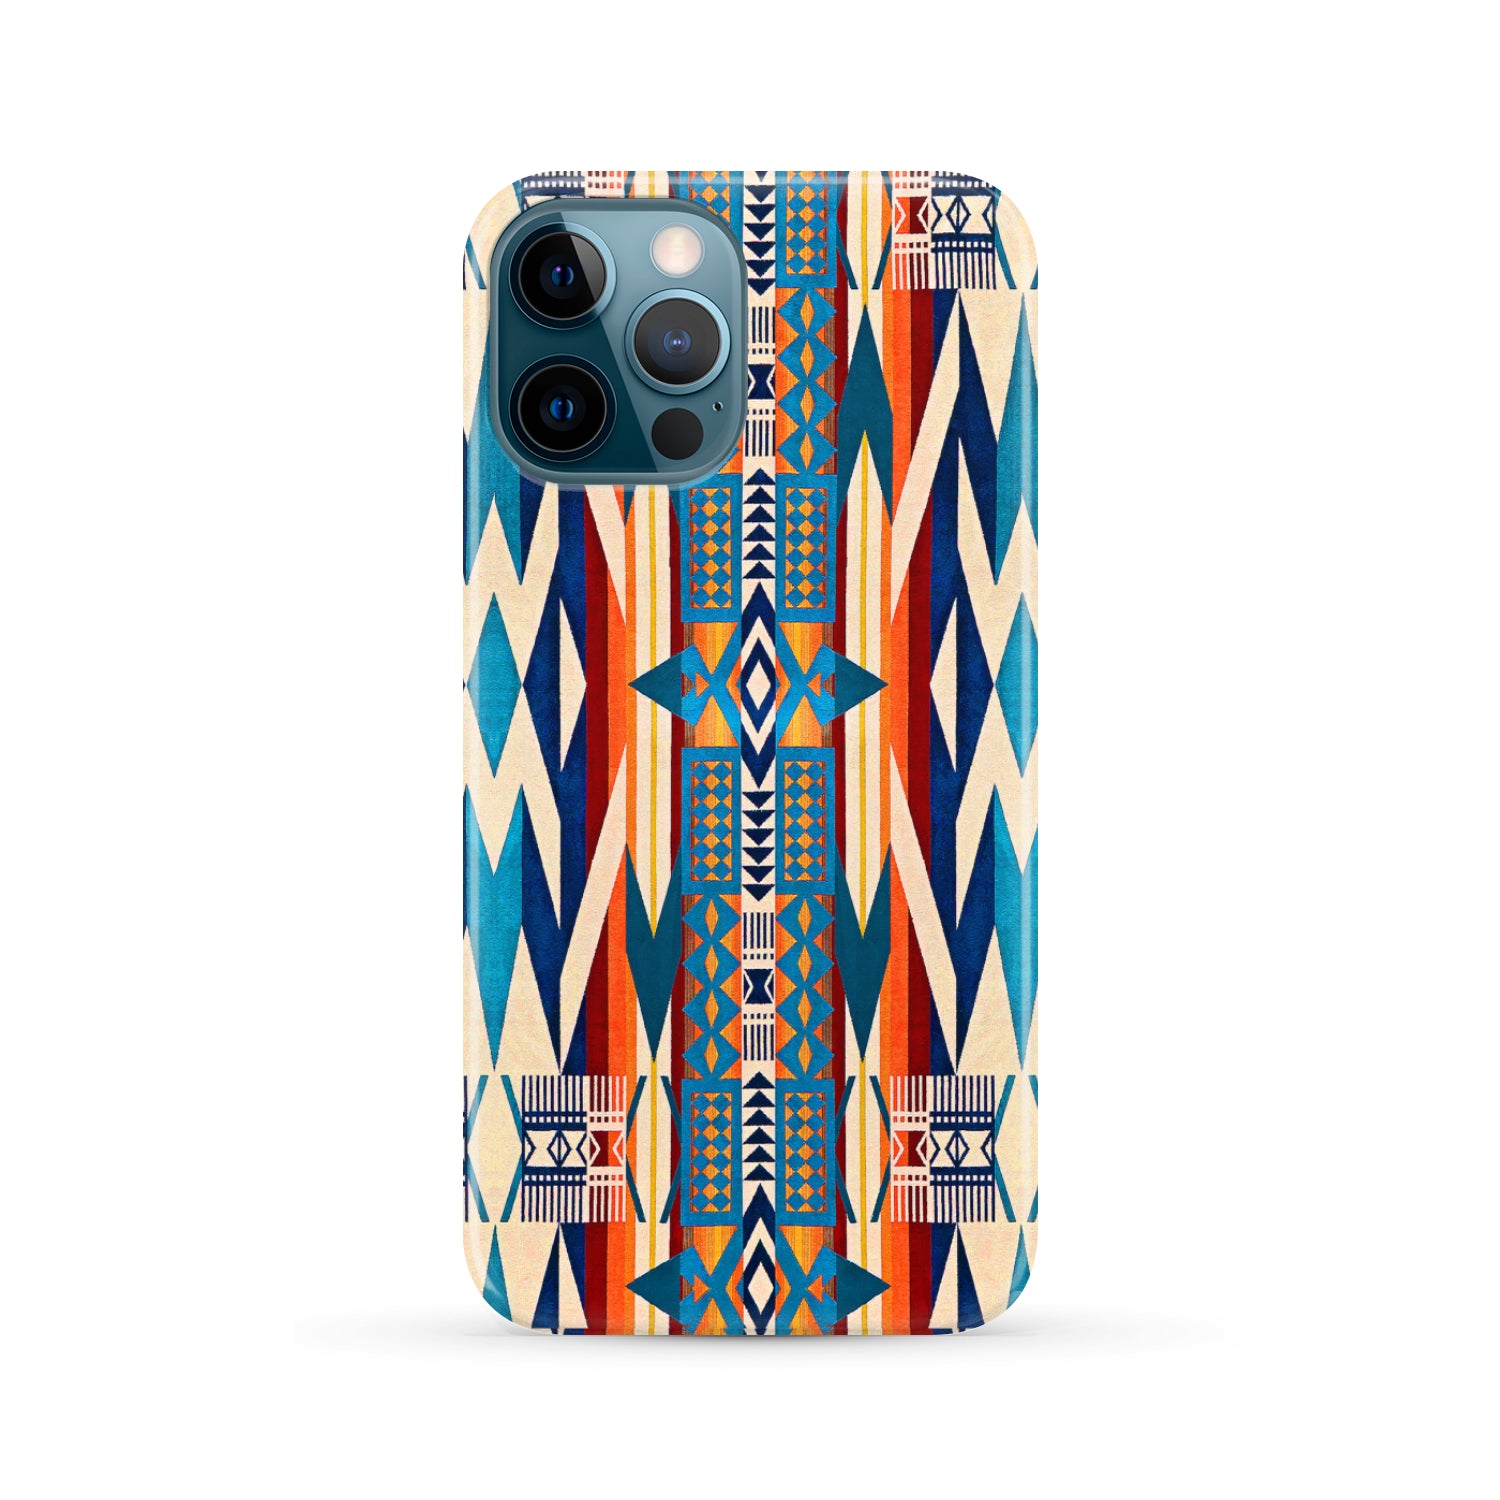 Powwow Storepc0001 patter color native american phone case new